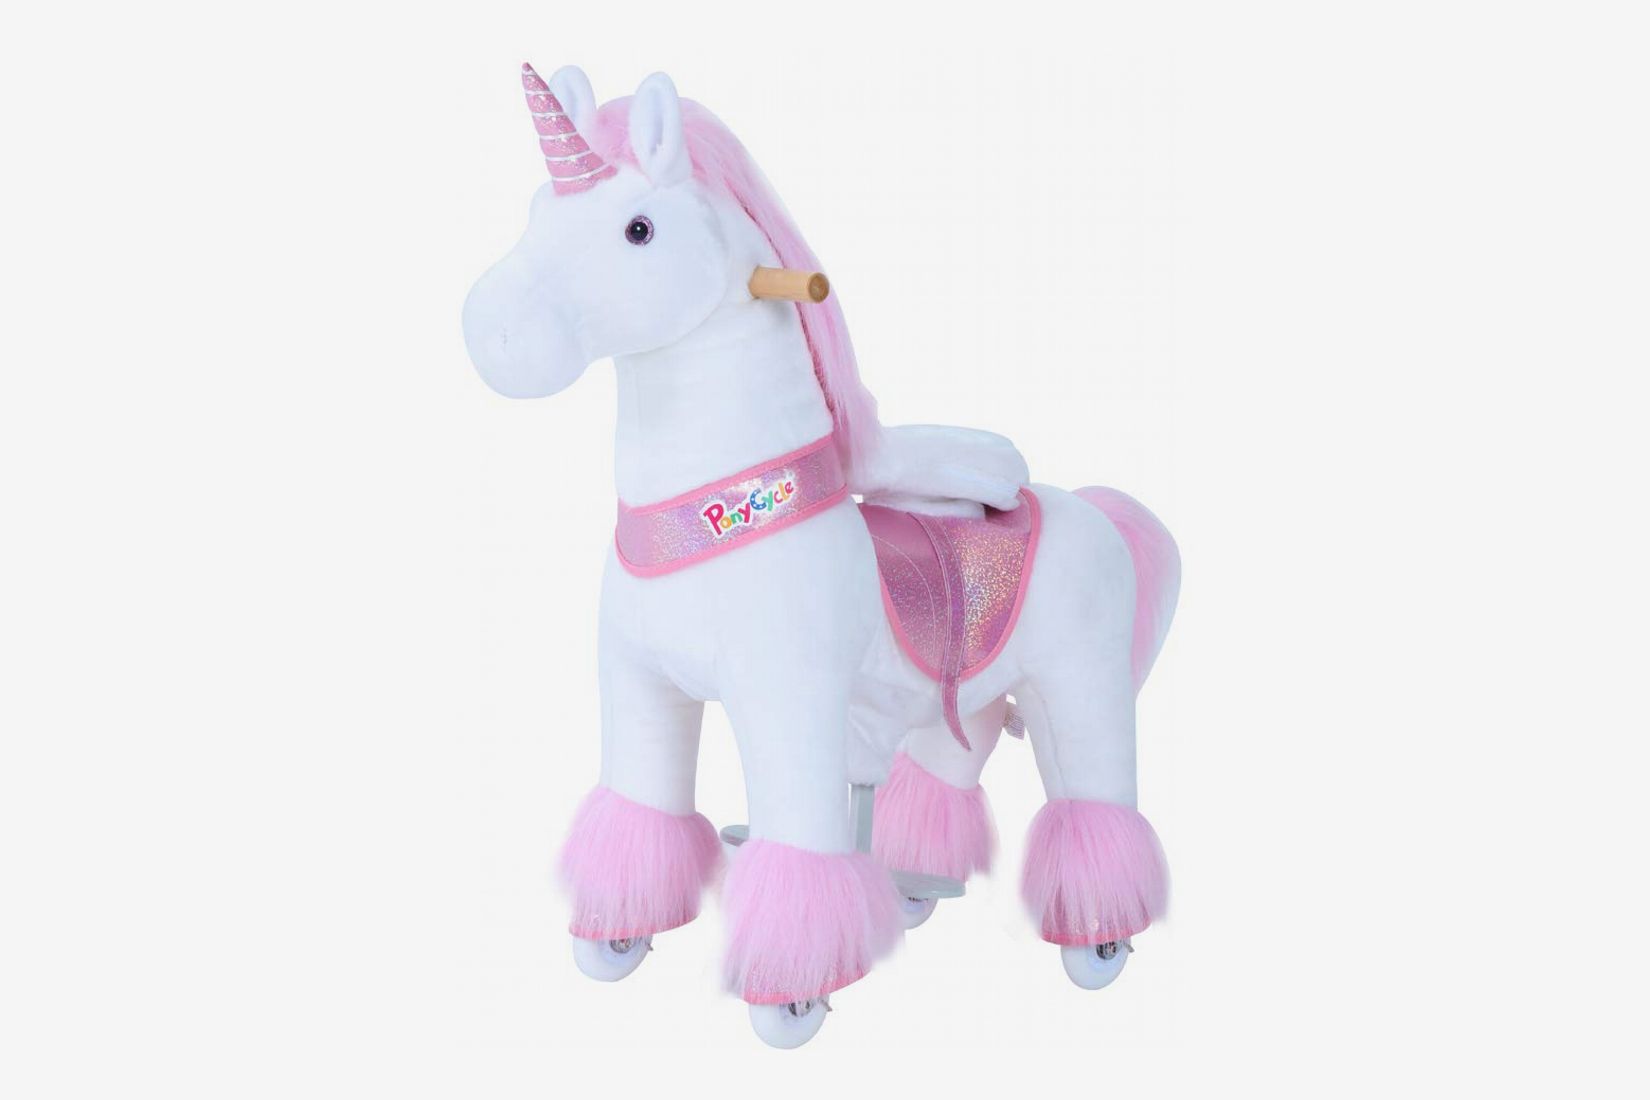 Official PonyCycle Brown With White Hoof Ride On Toy Horse Small 3-5 Years Old 